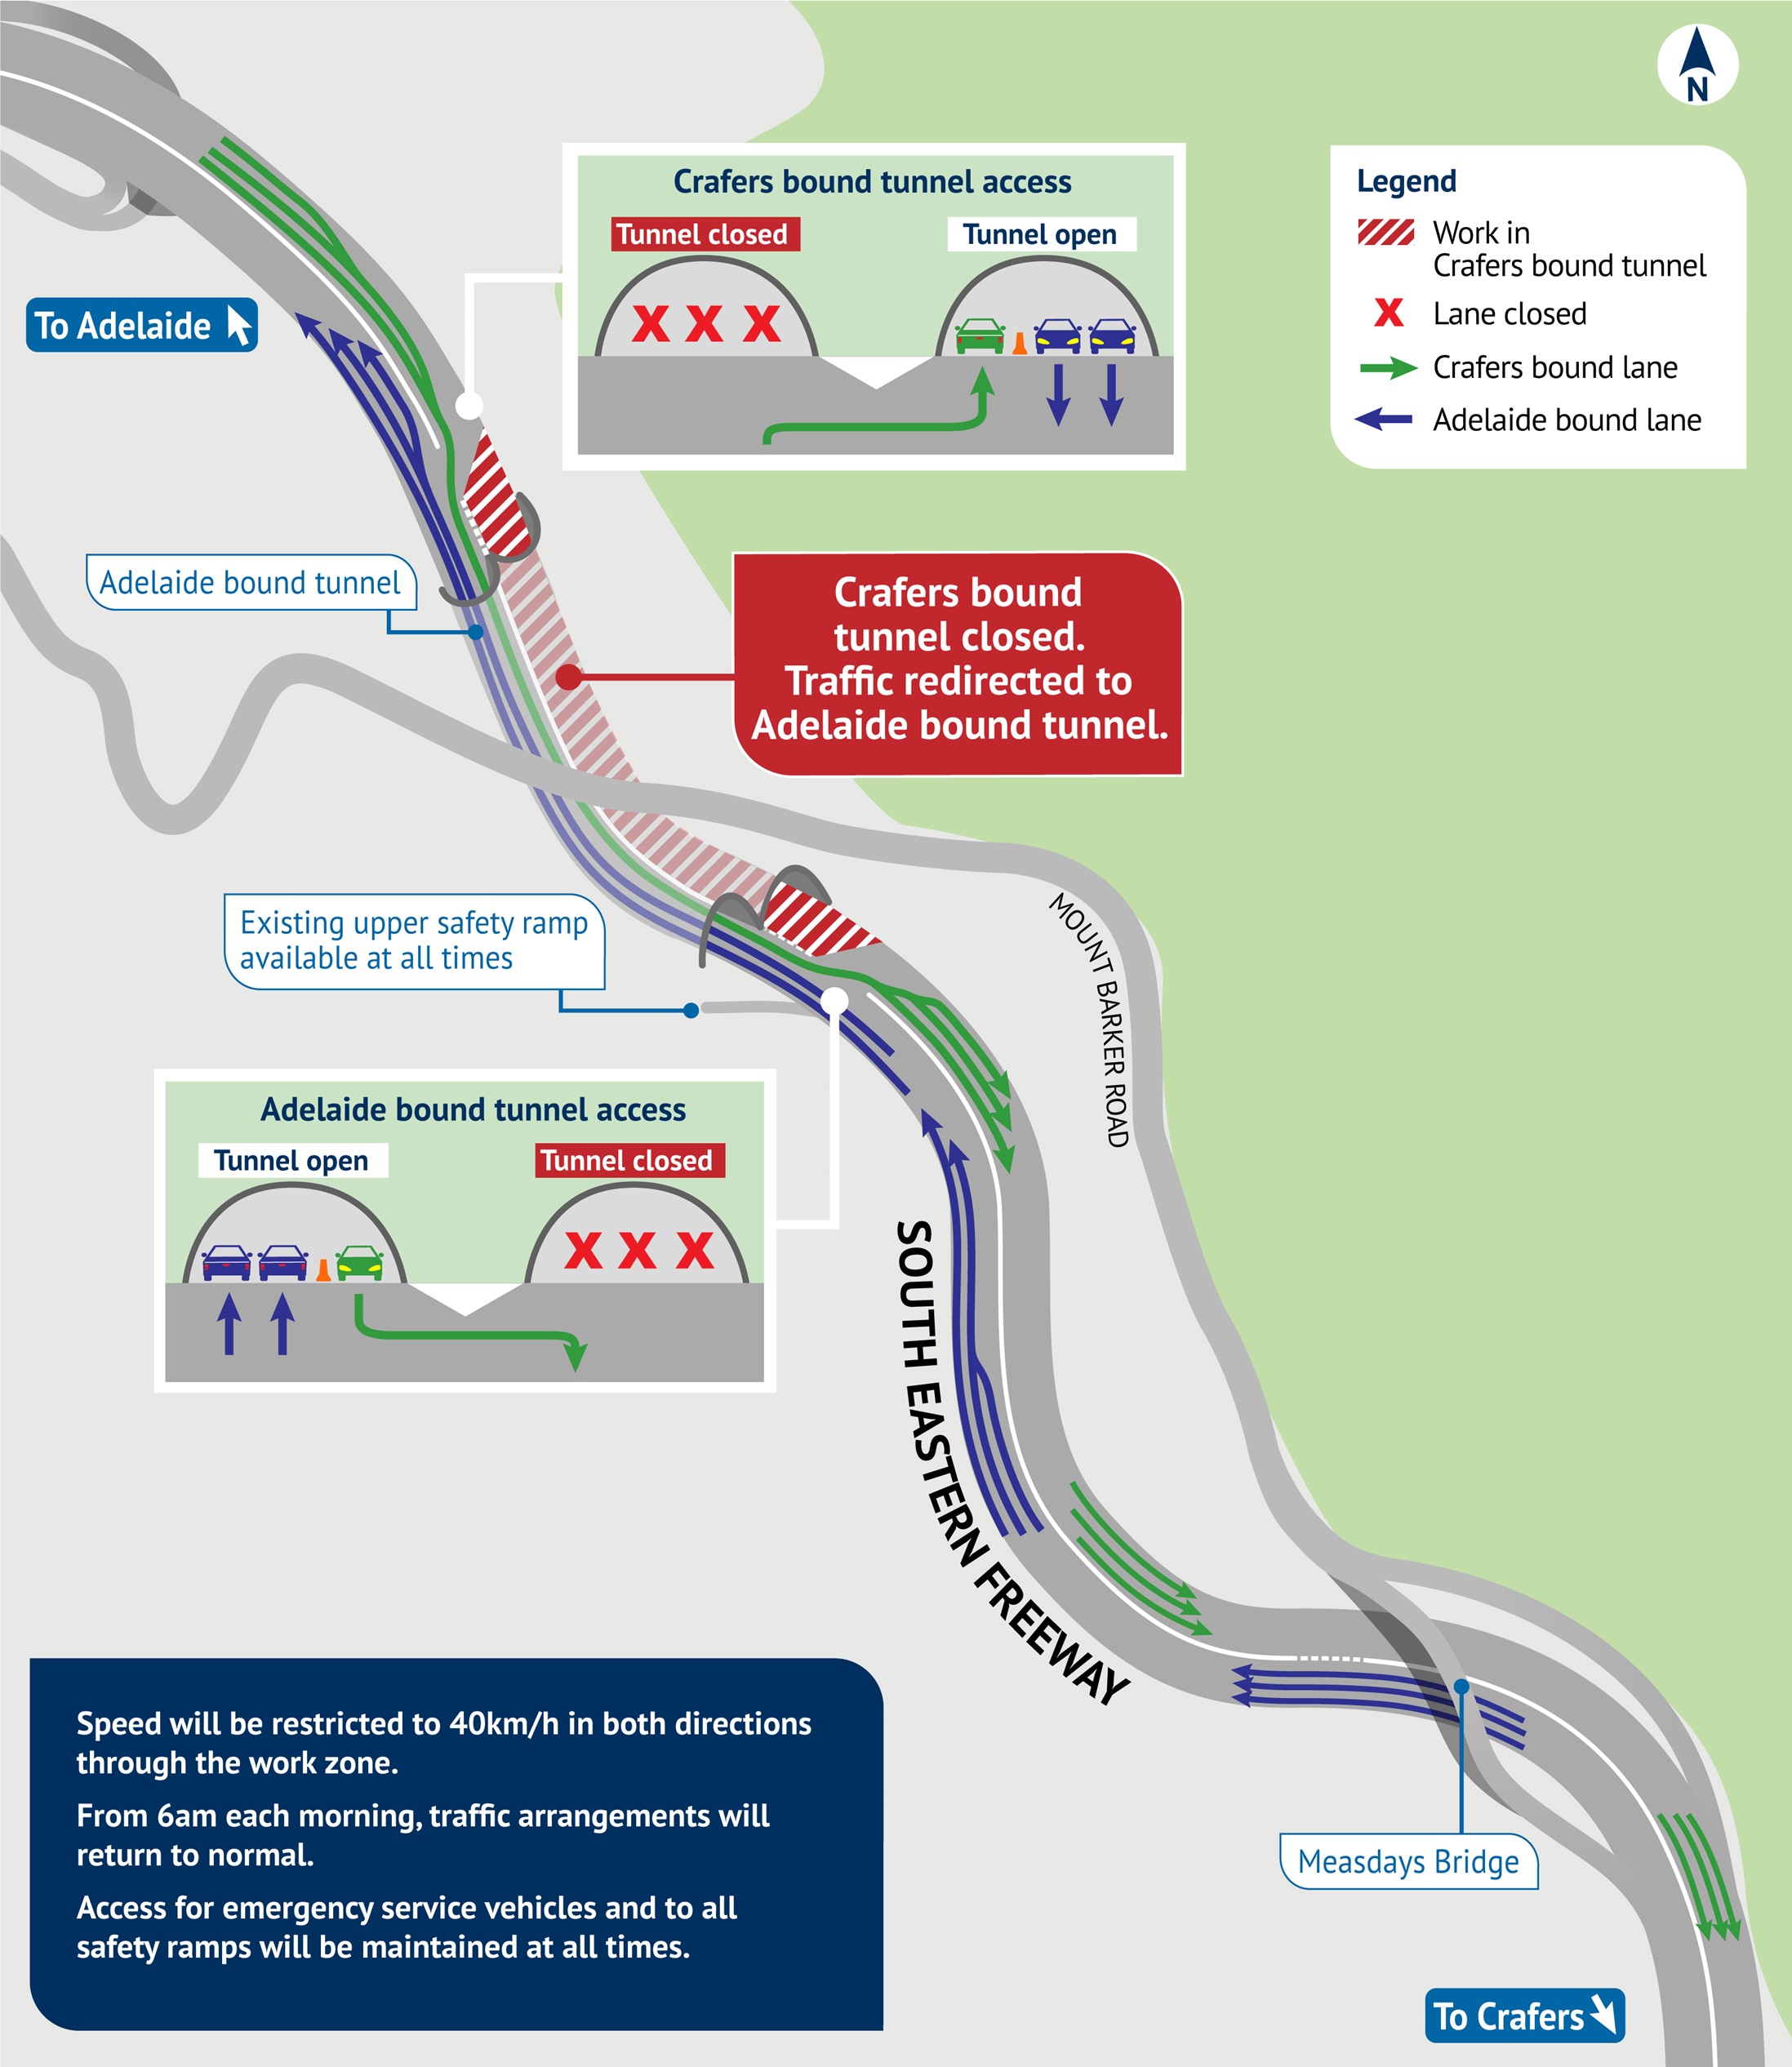 A Graphic showing the details of the Heysen Tunnels works